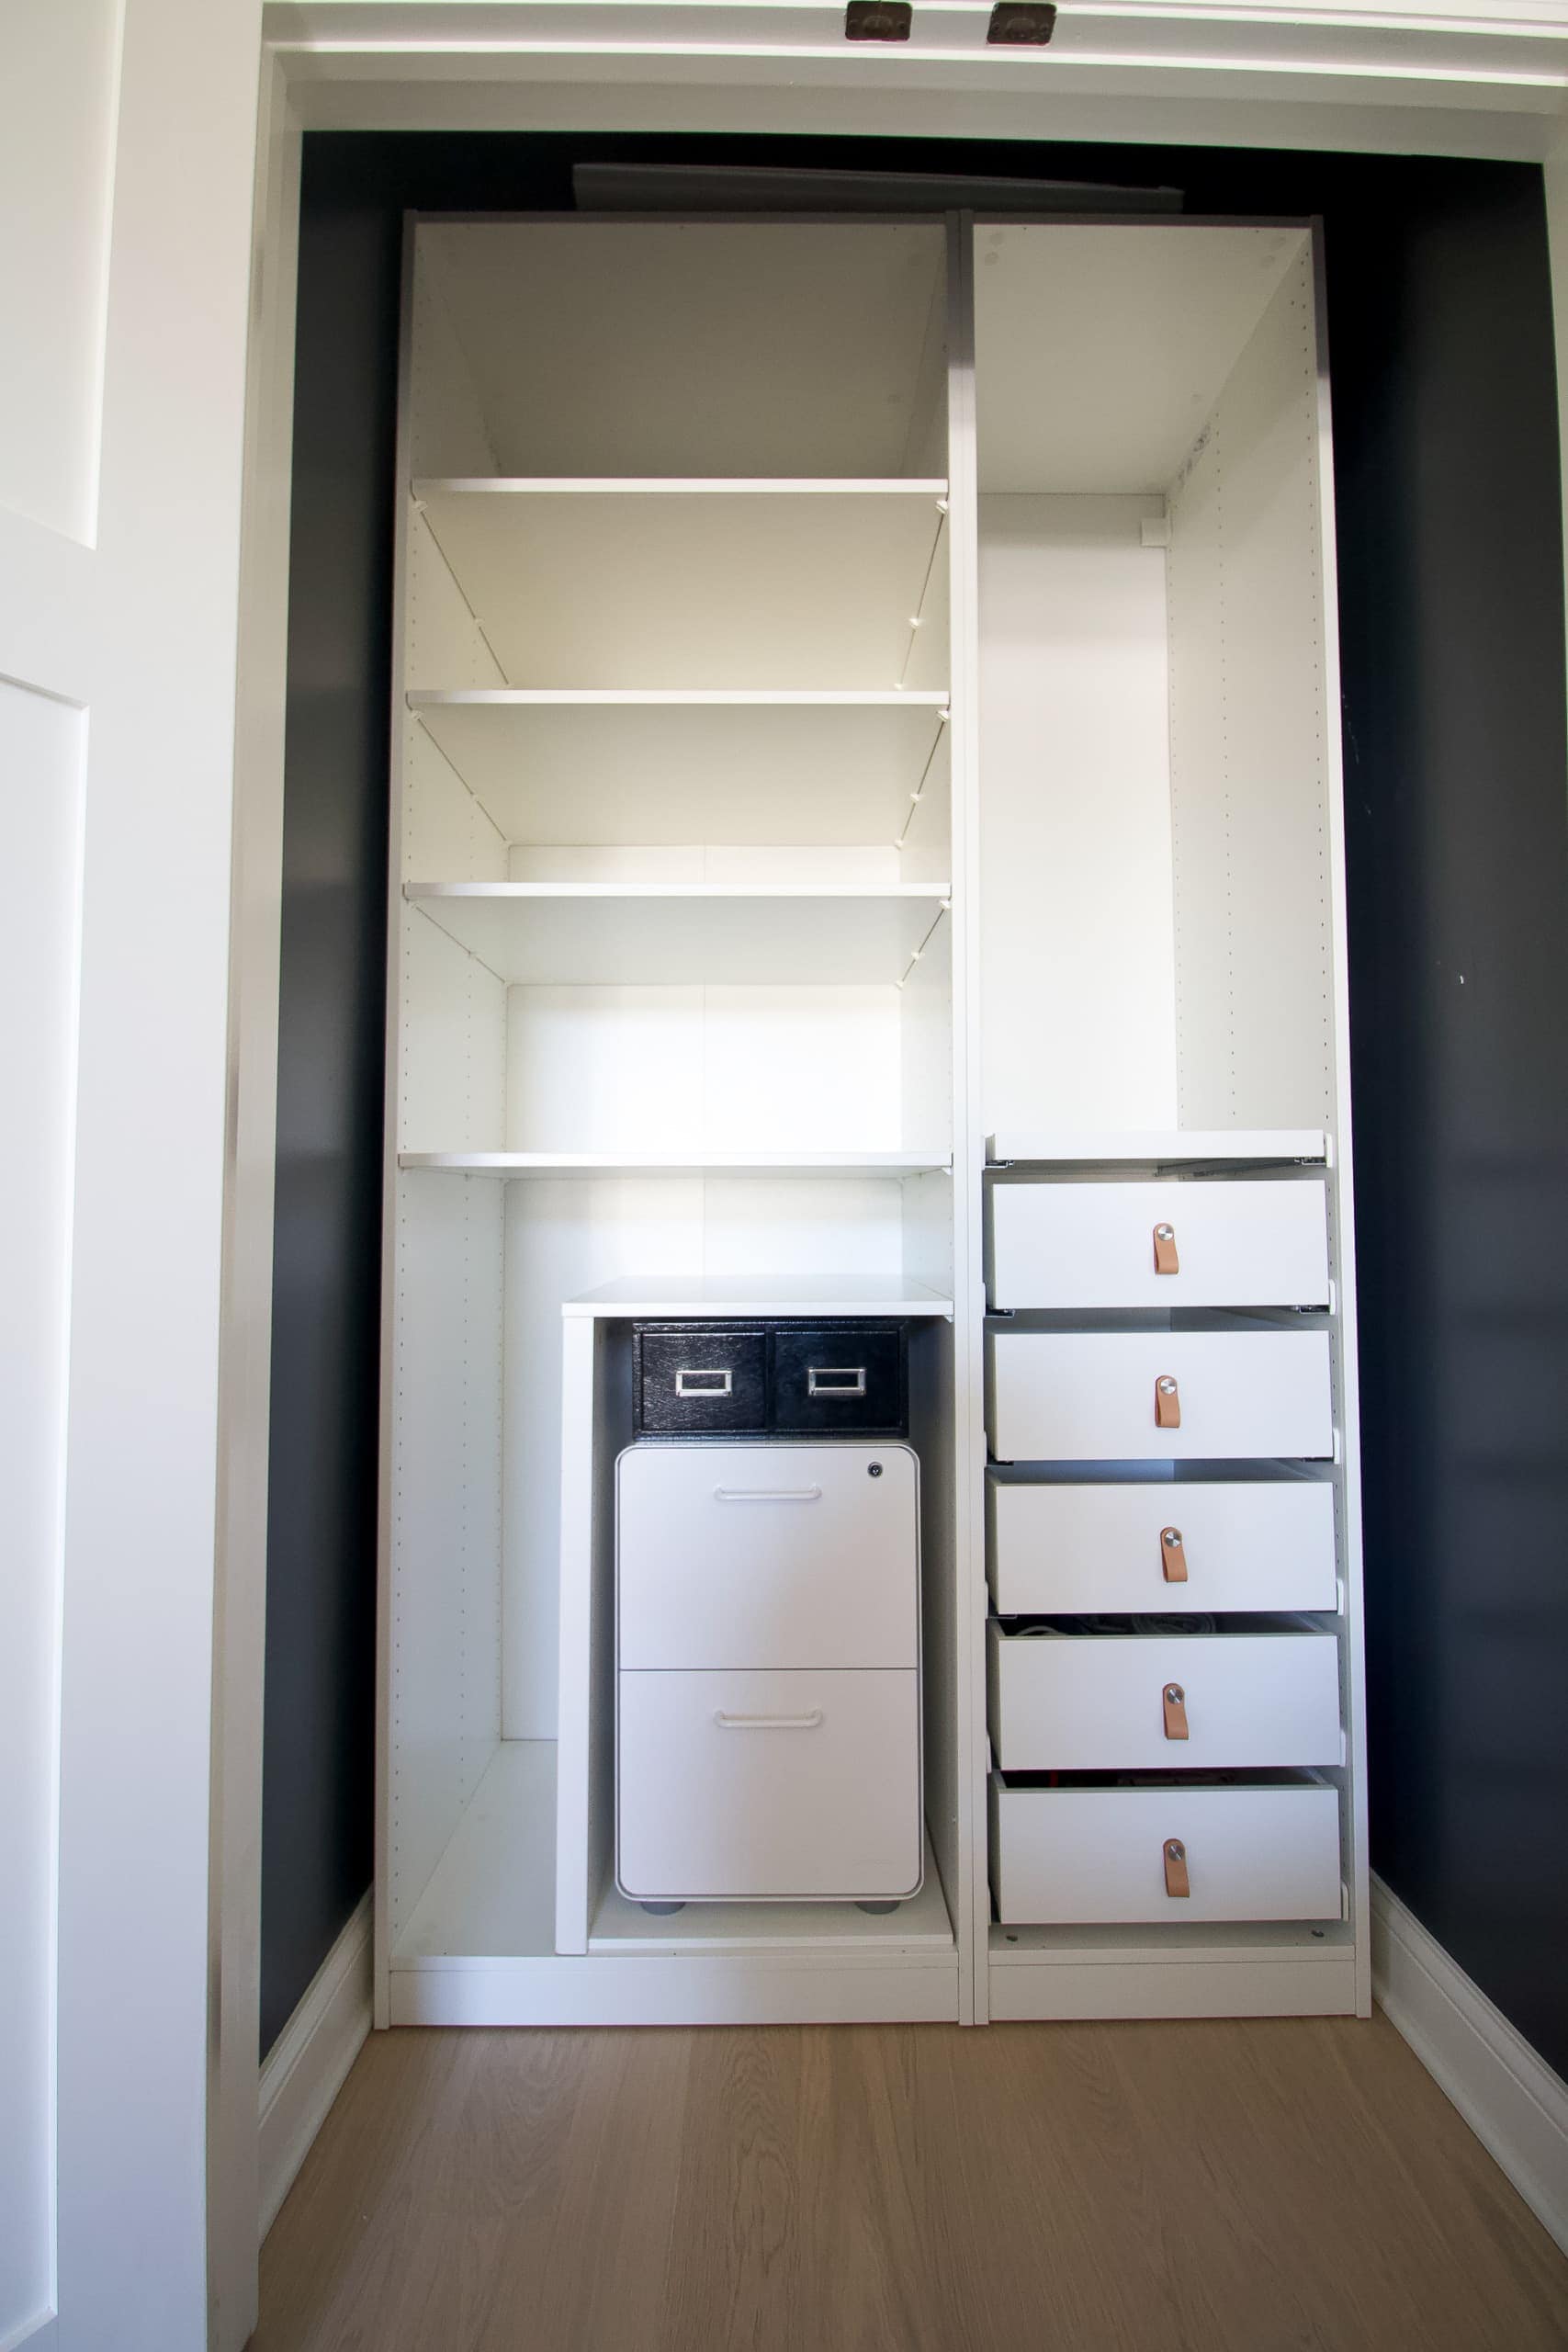 Our new ikea pax closet system